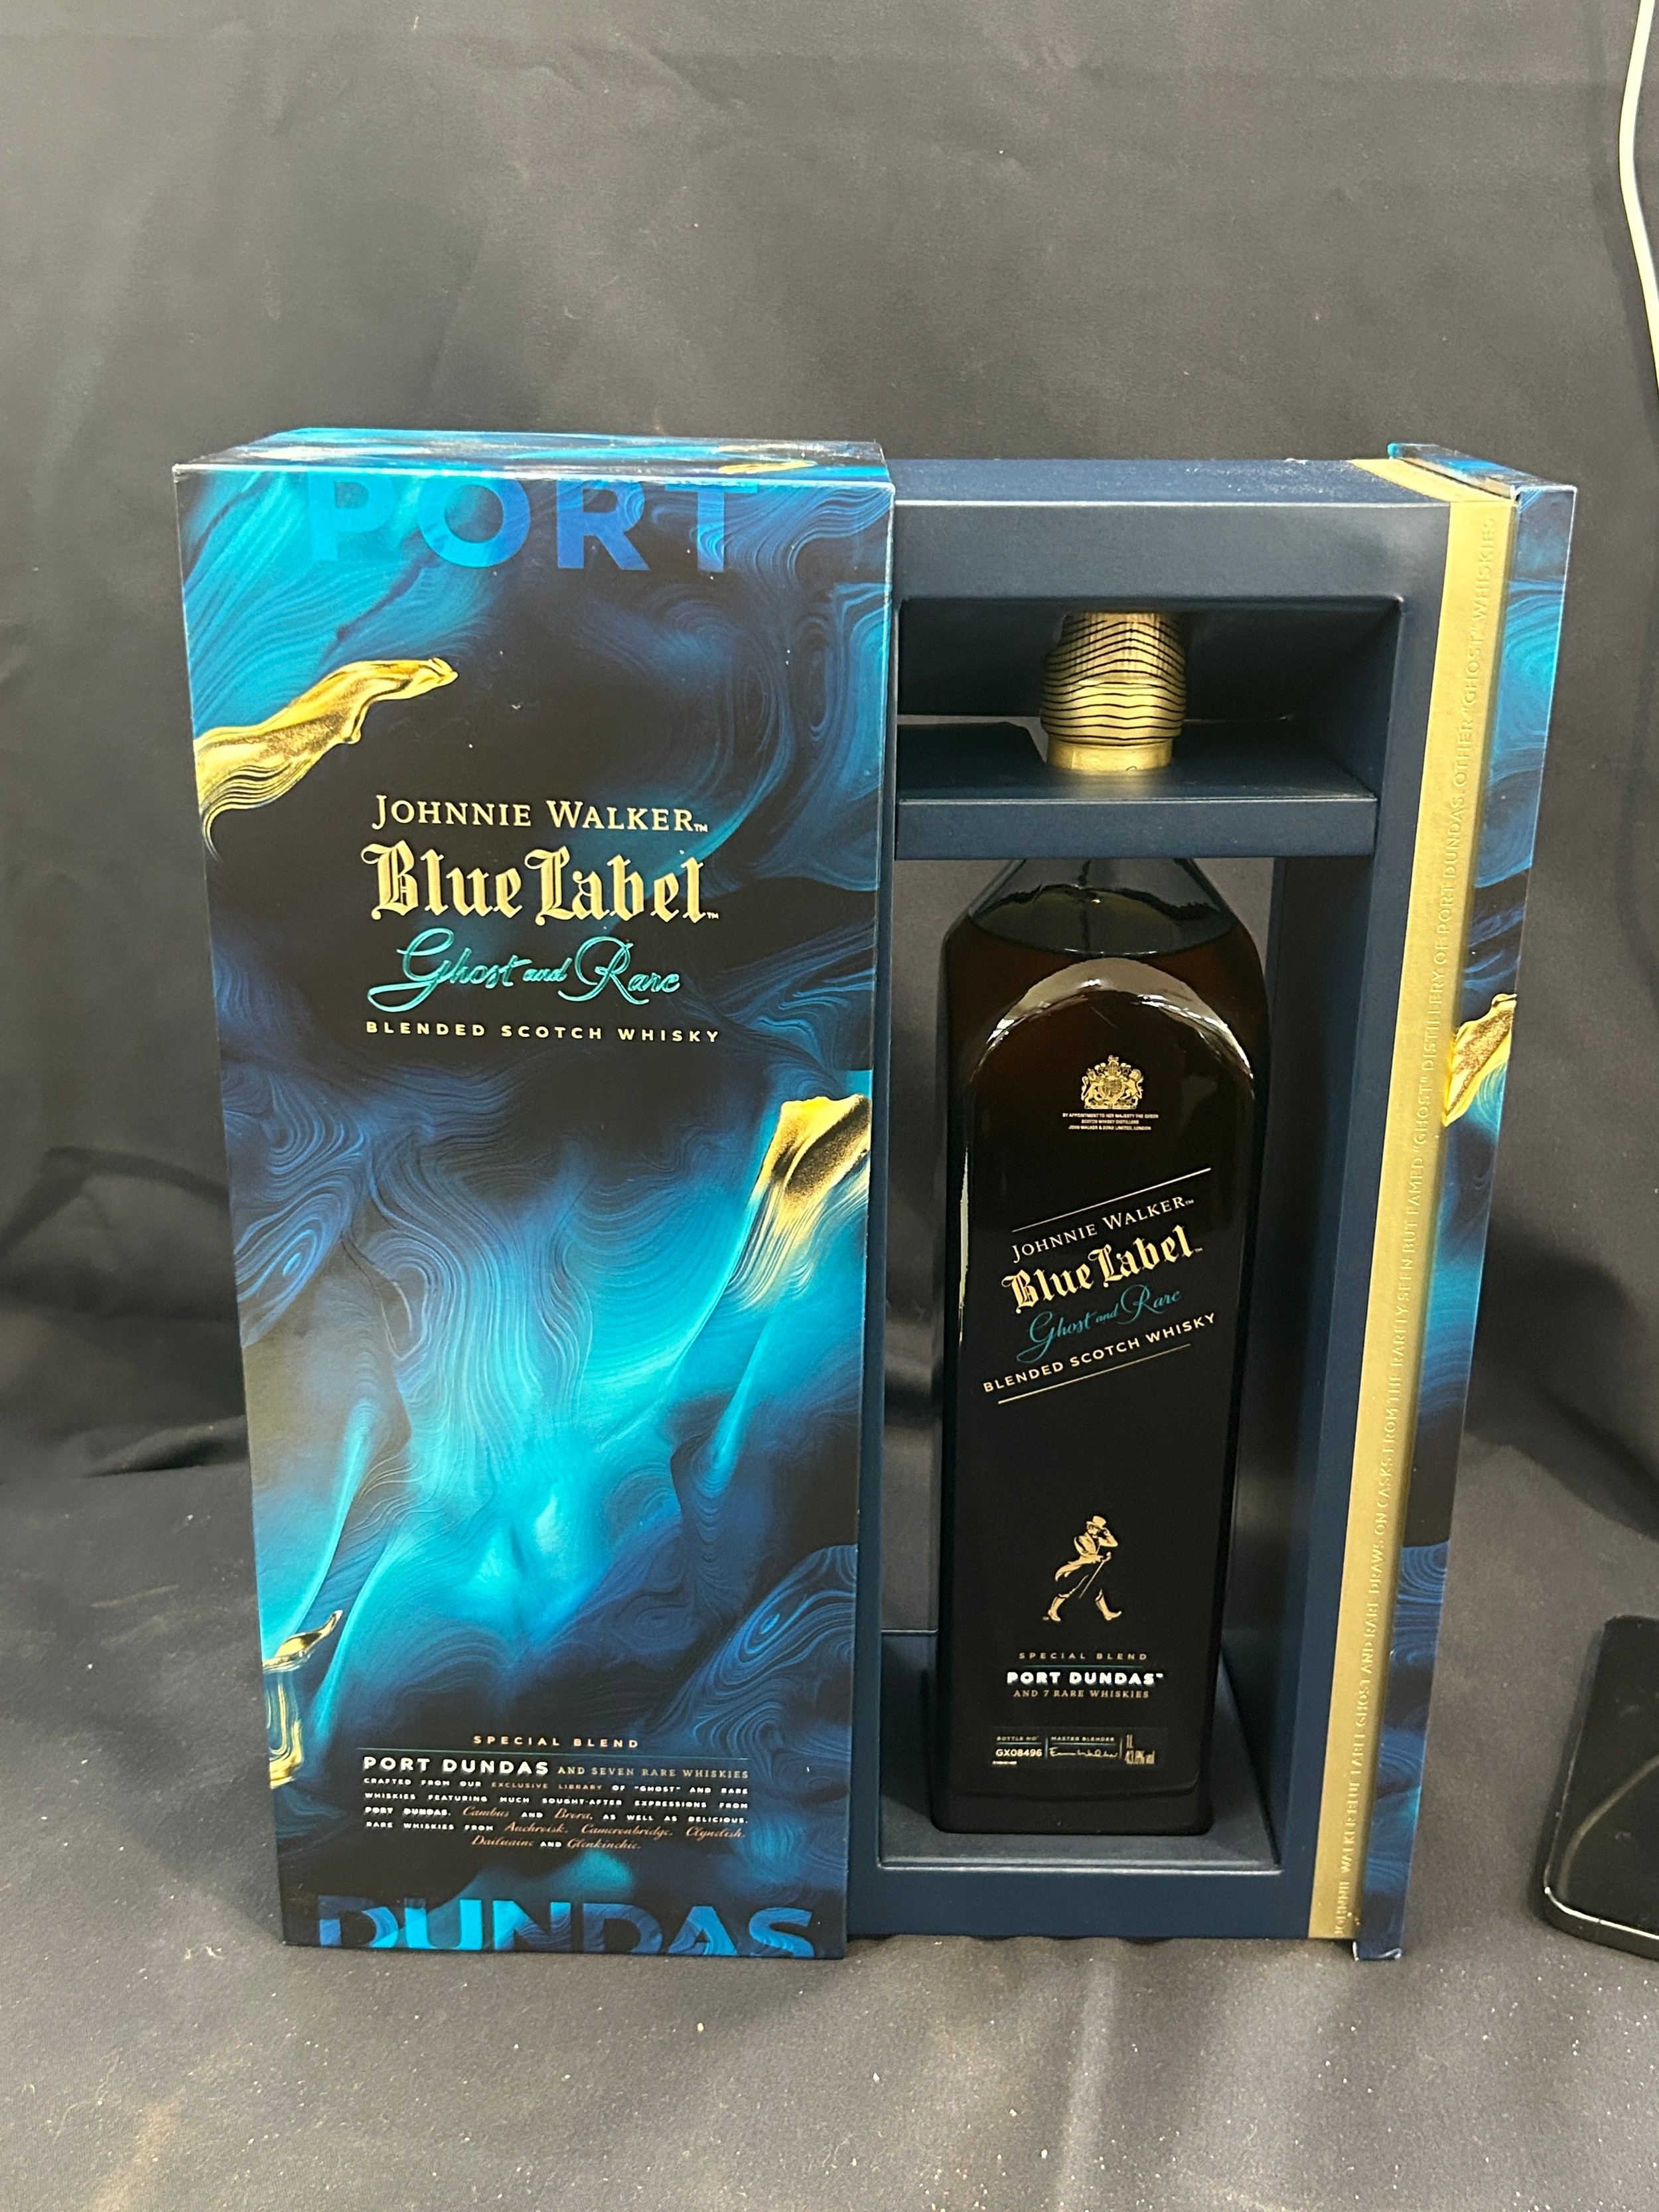 Boxed 1 litre bottle of Johnnie Walker Blue Label Ghost and rare whisky, sealed - Image 4 of 6